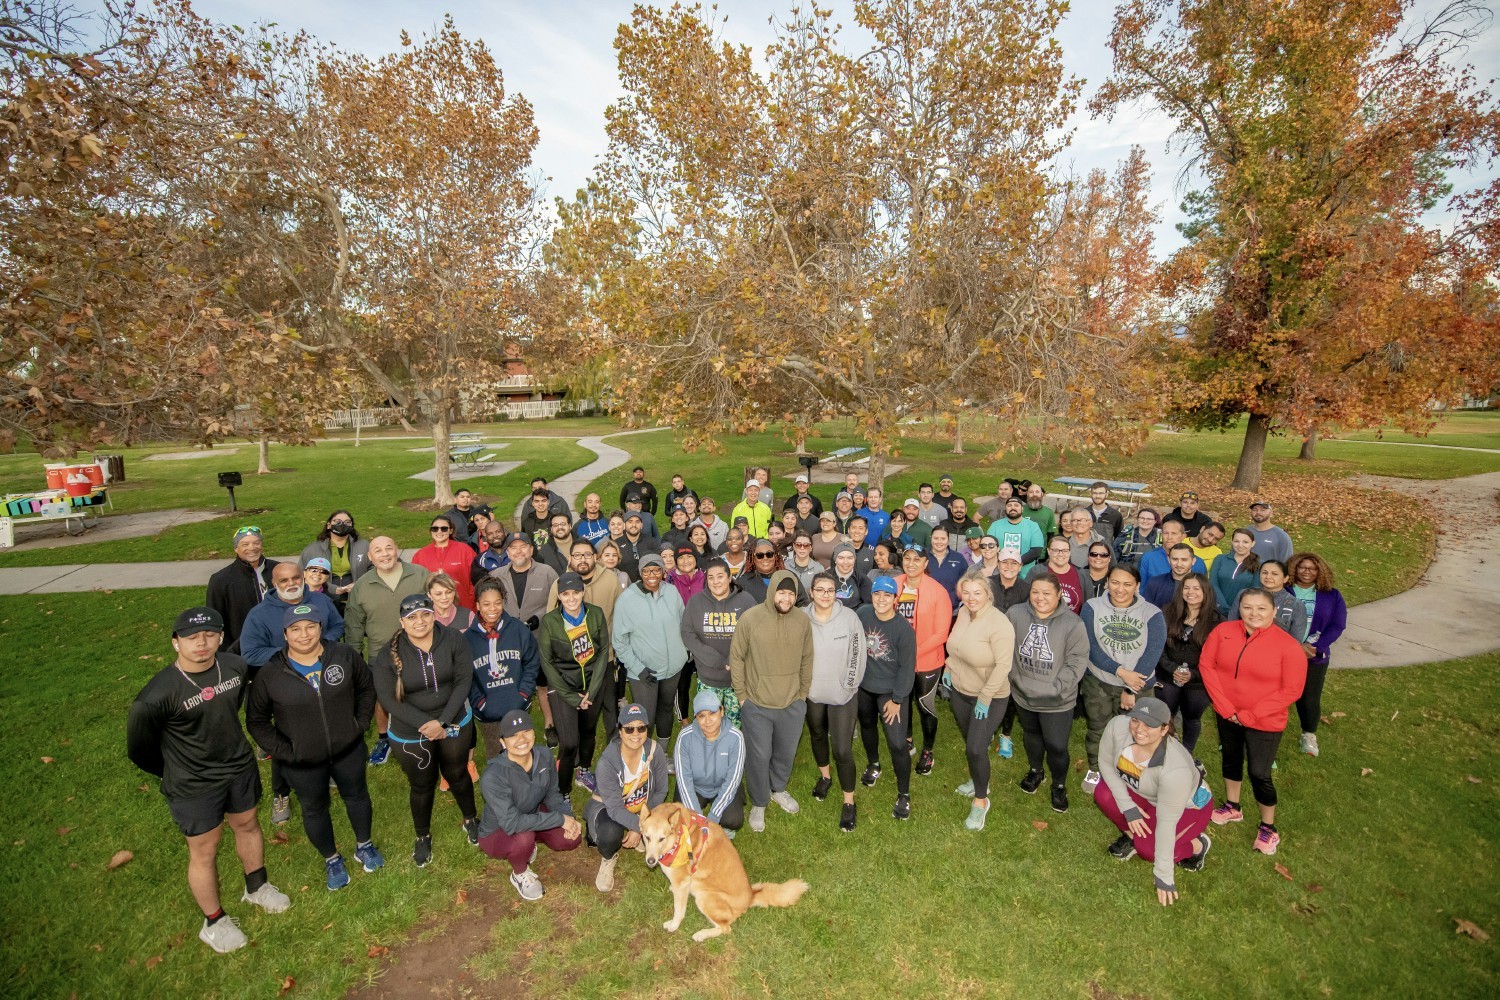 The San Manuel Run Team, compiled of 138 team members and their families trained for six months and ran the OC Marathon.